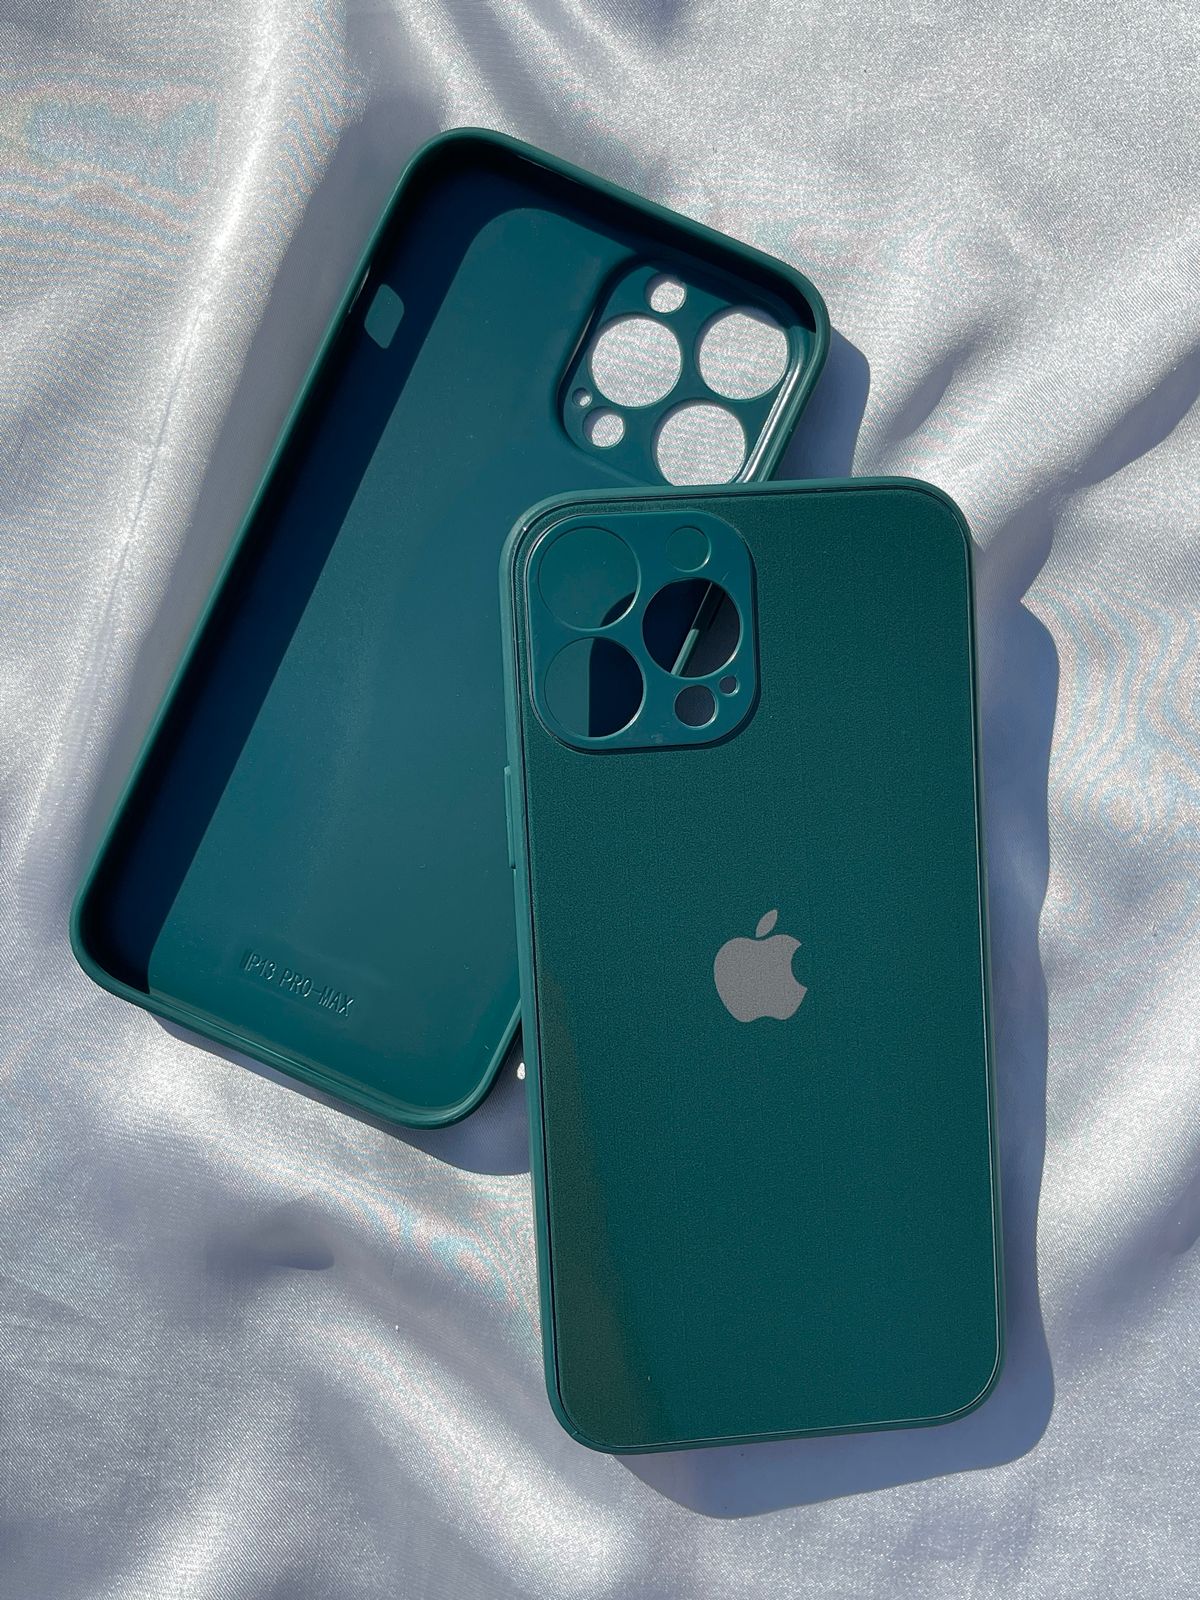 iPhone "13 Pro Max" Tempered Glass "Solid" Case